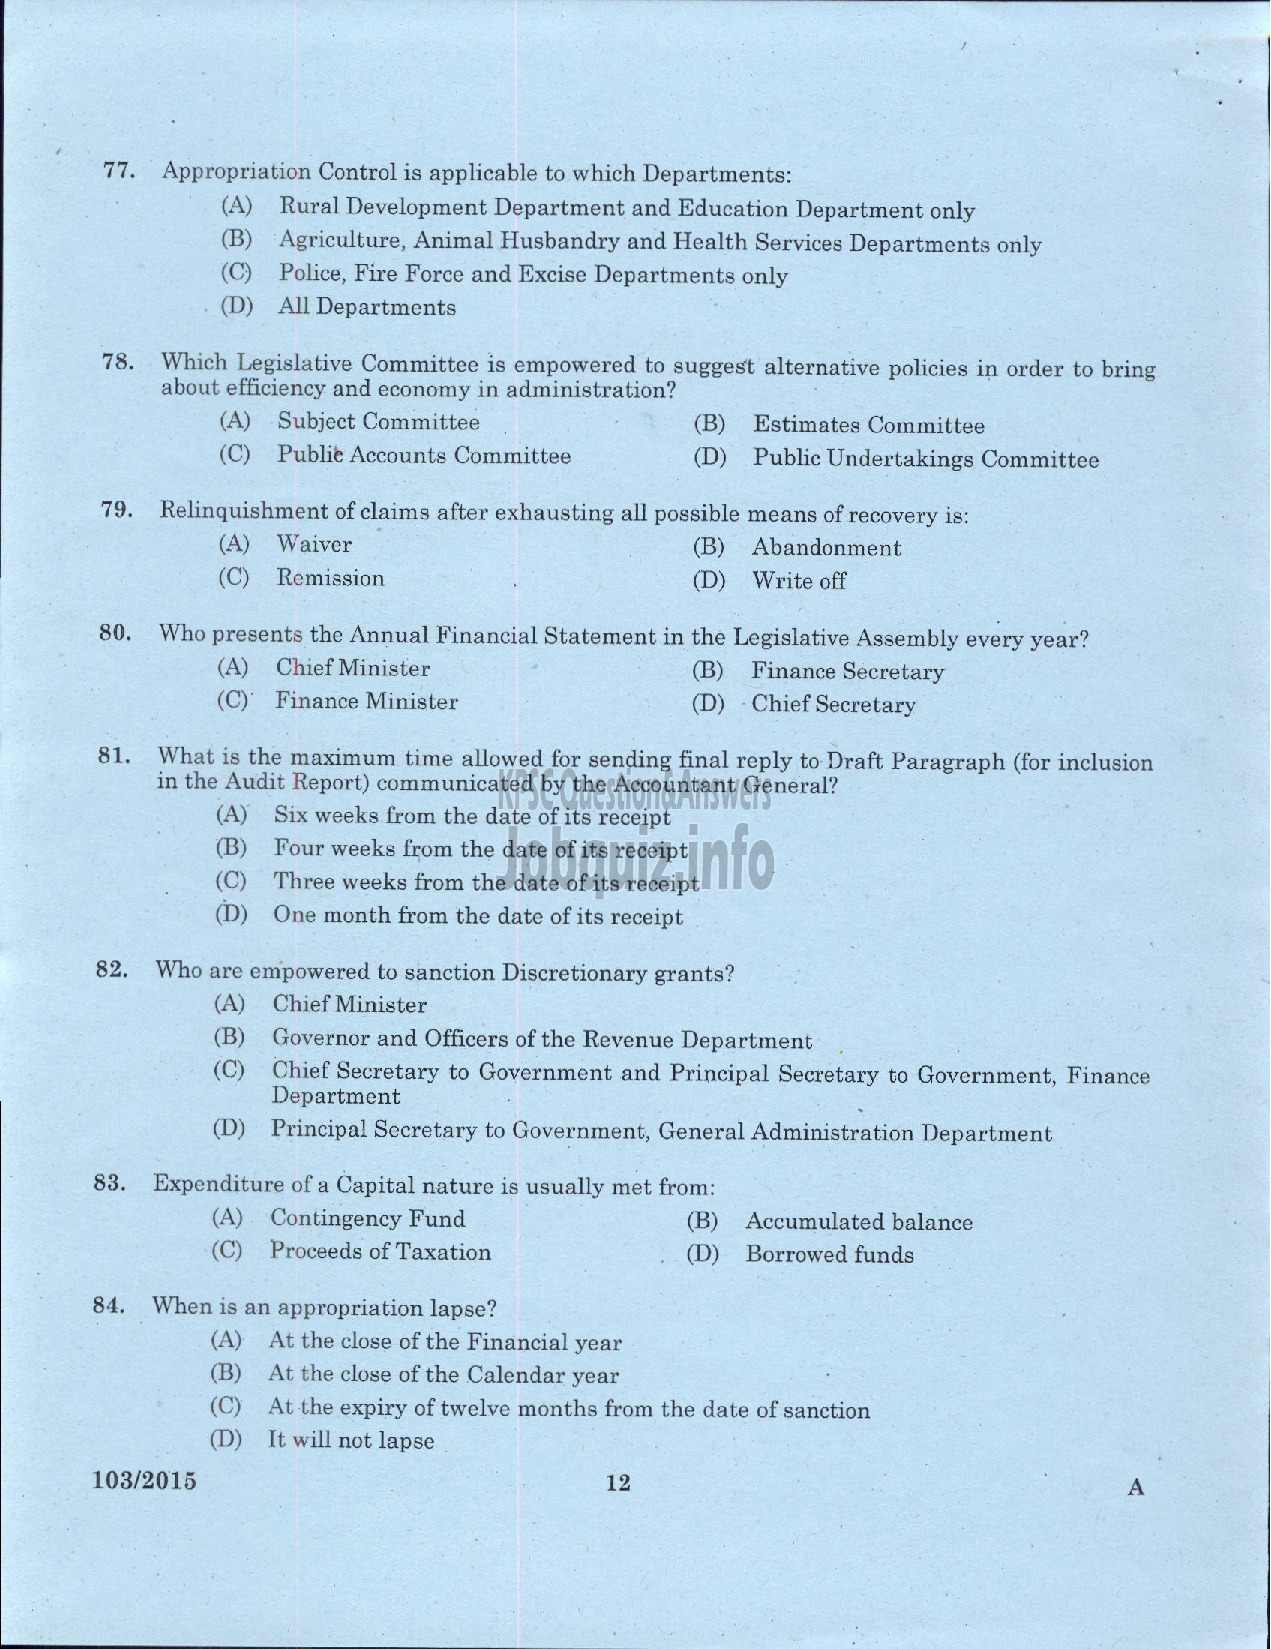 Kerala PSC Question Paper - ADMINISTRATIVE OFFICER BY TRANSFER INTERNAL KSRTC-10